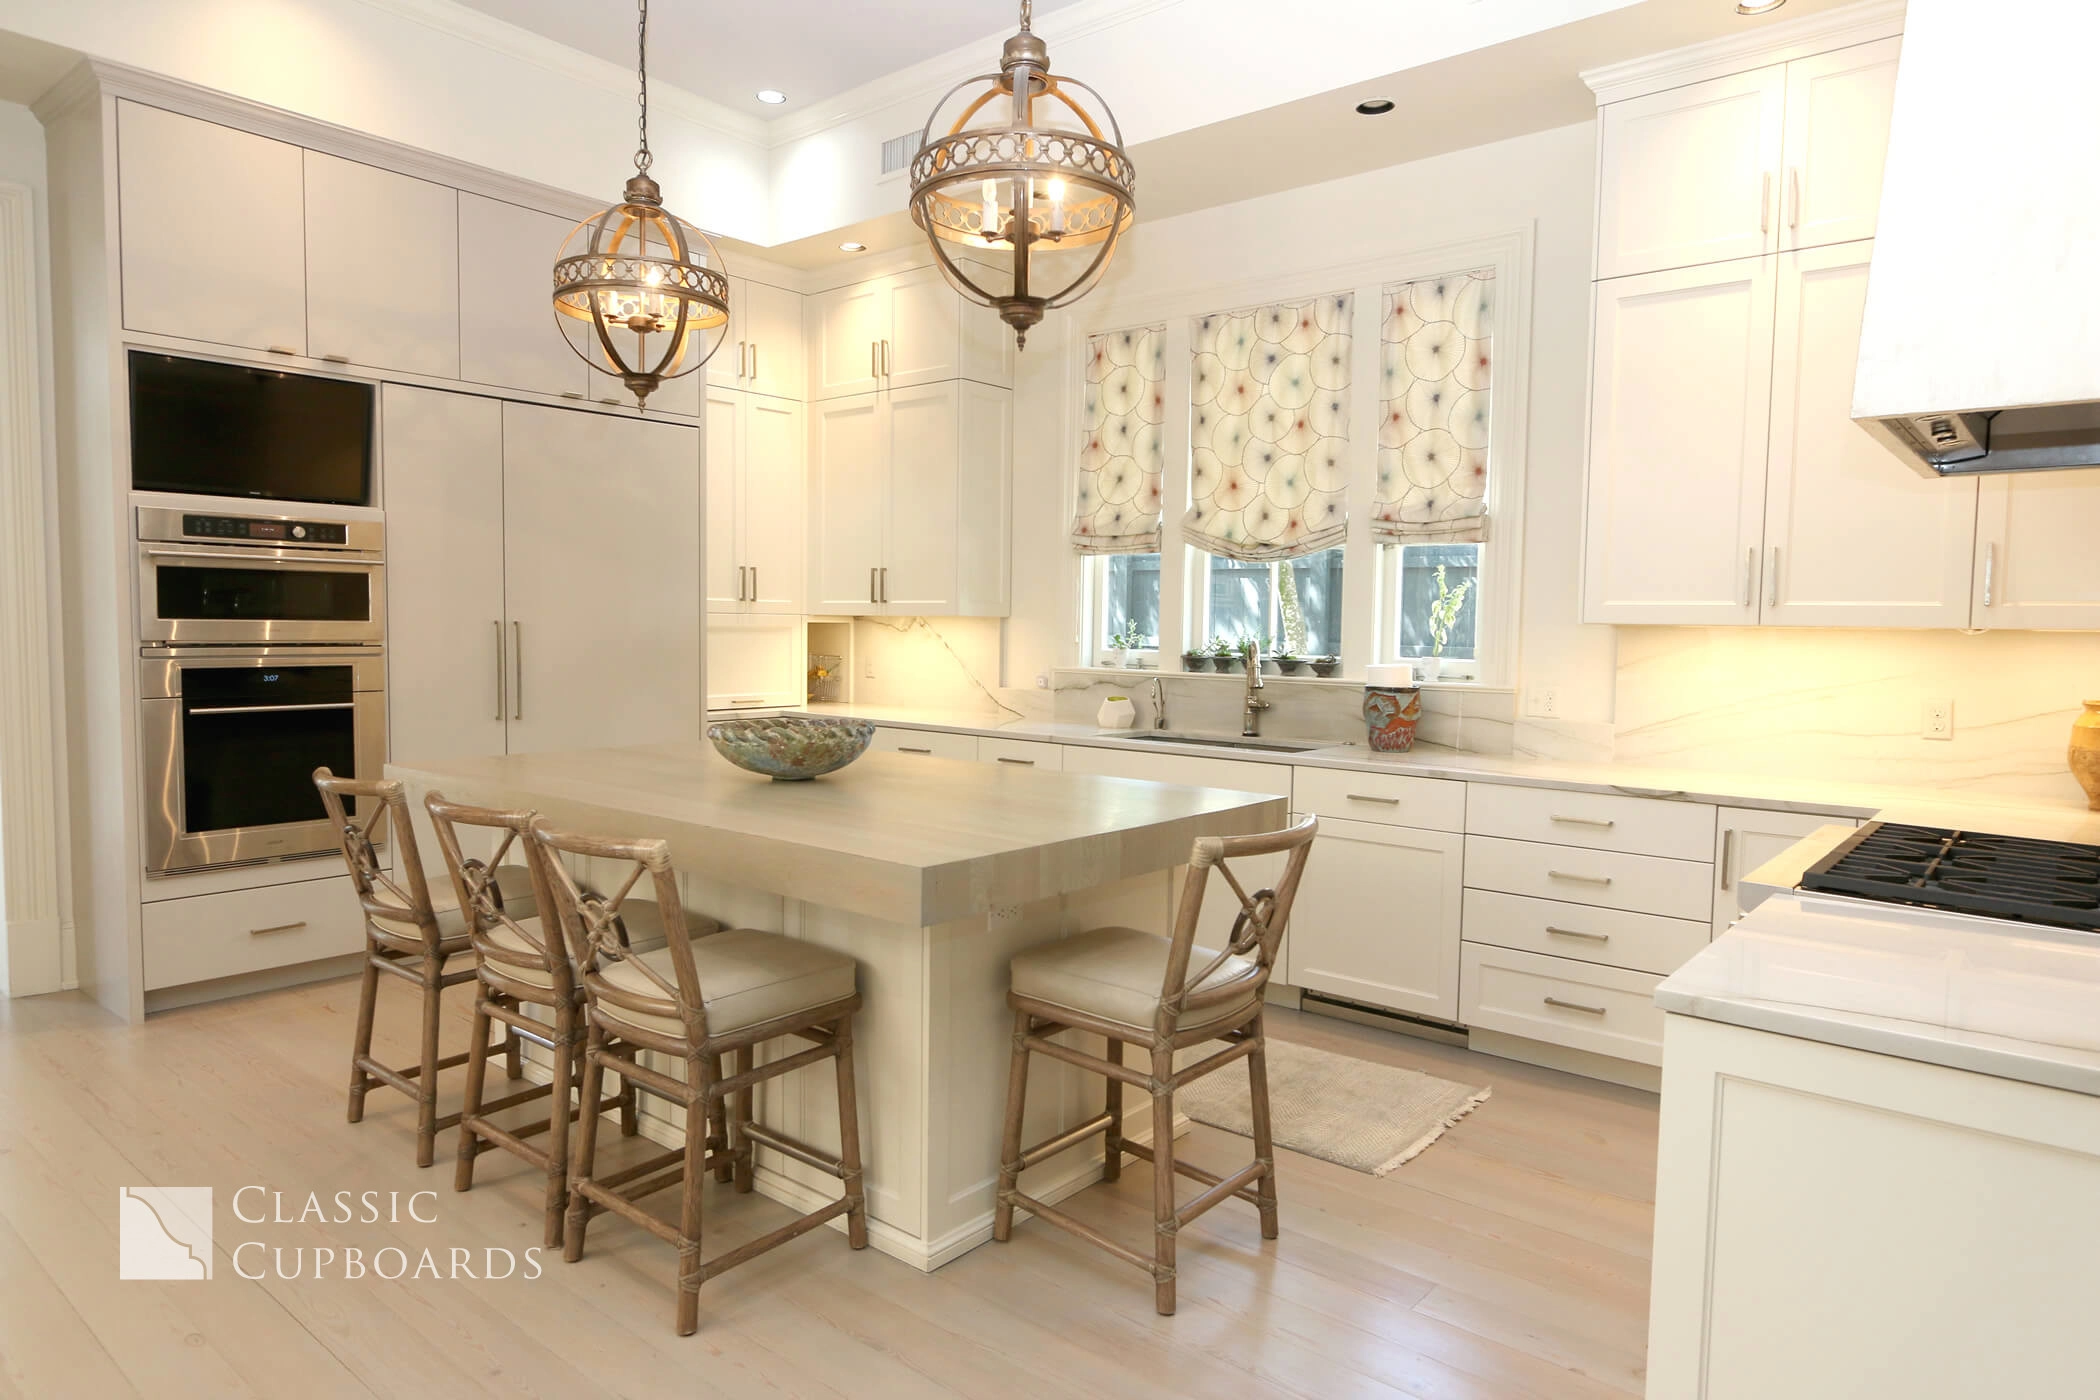 Custom Transitional Kitchen with neutral accents